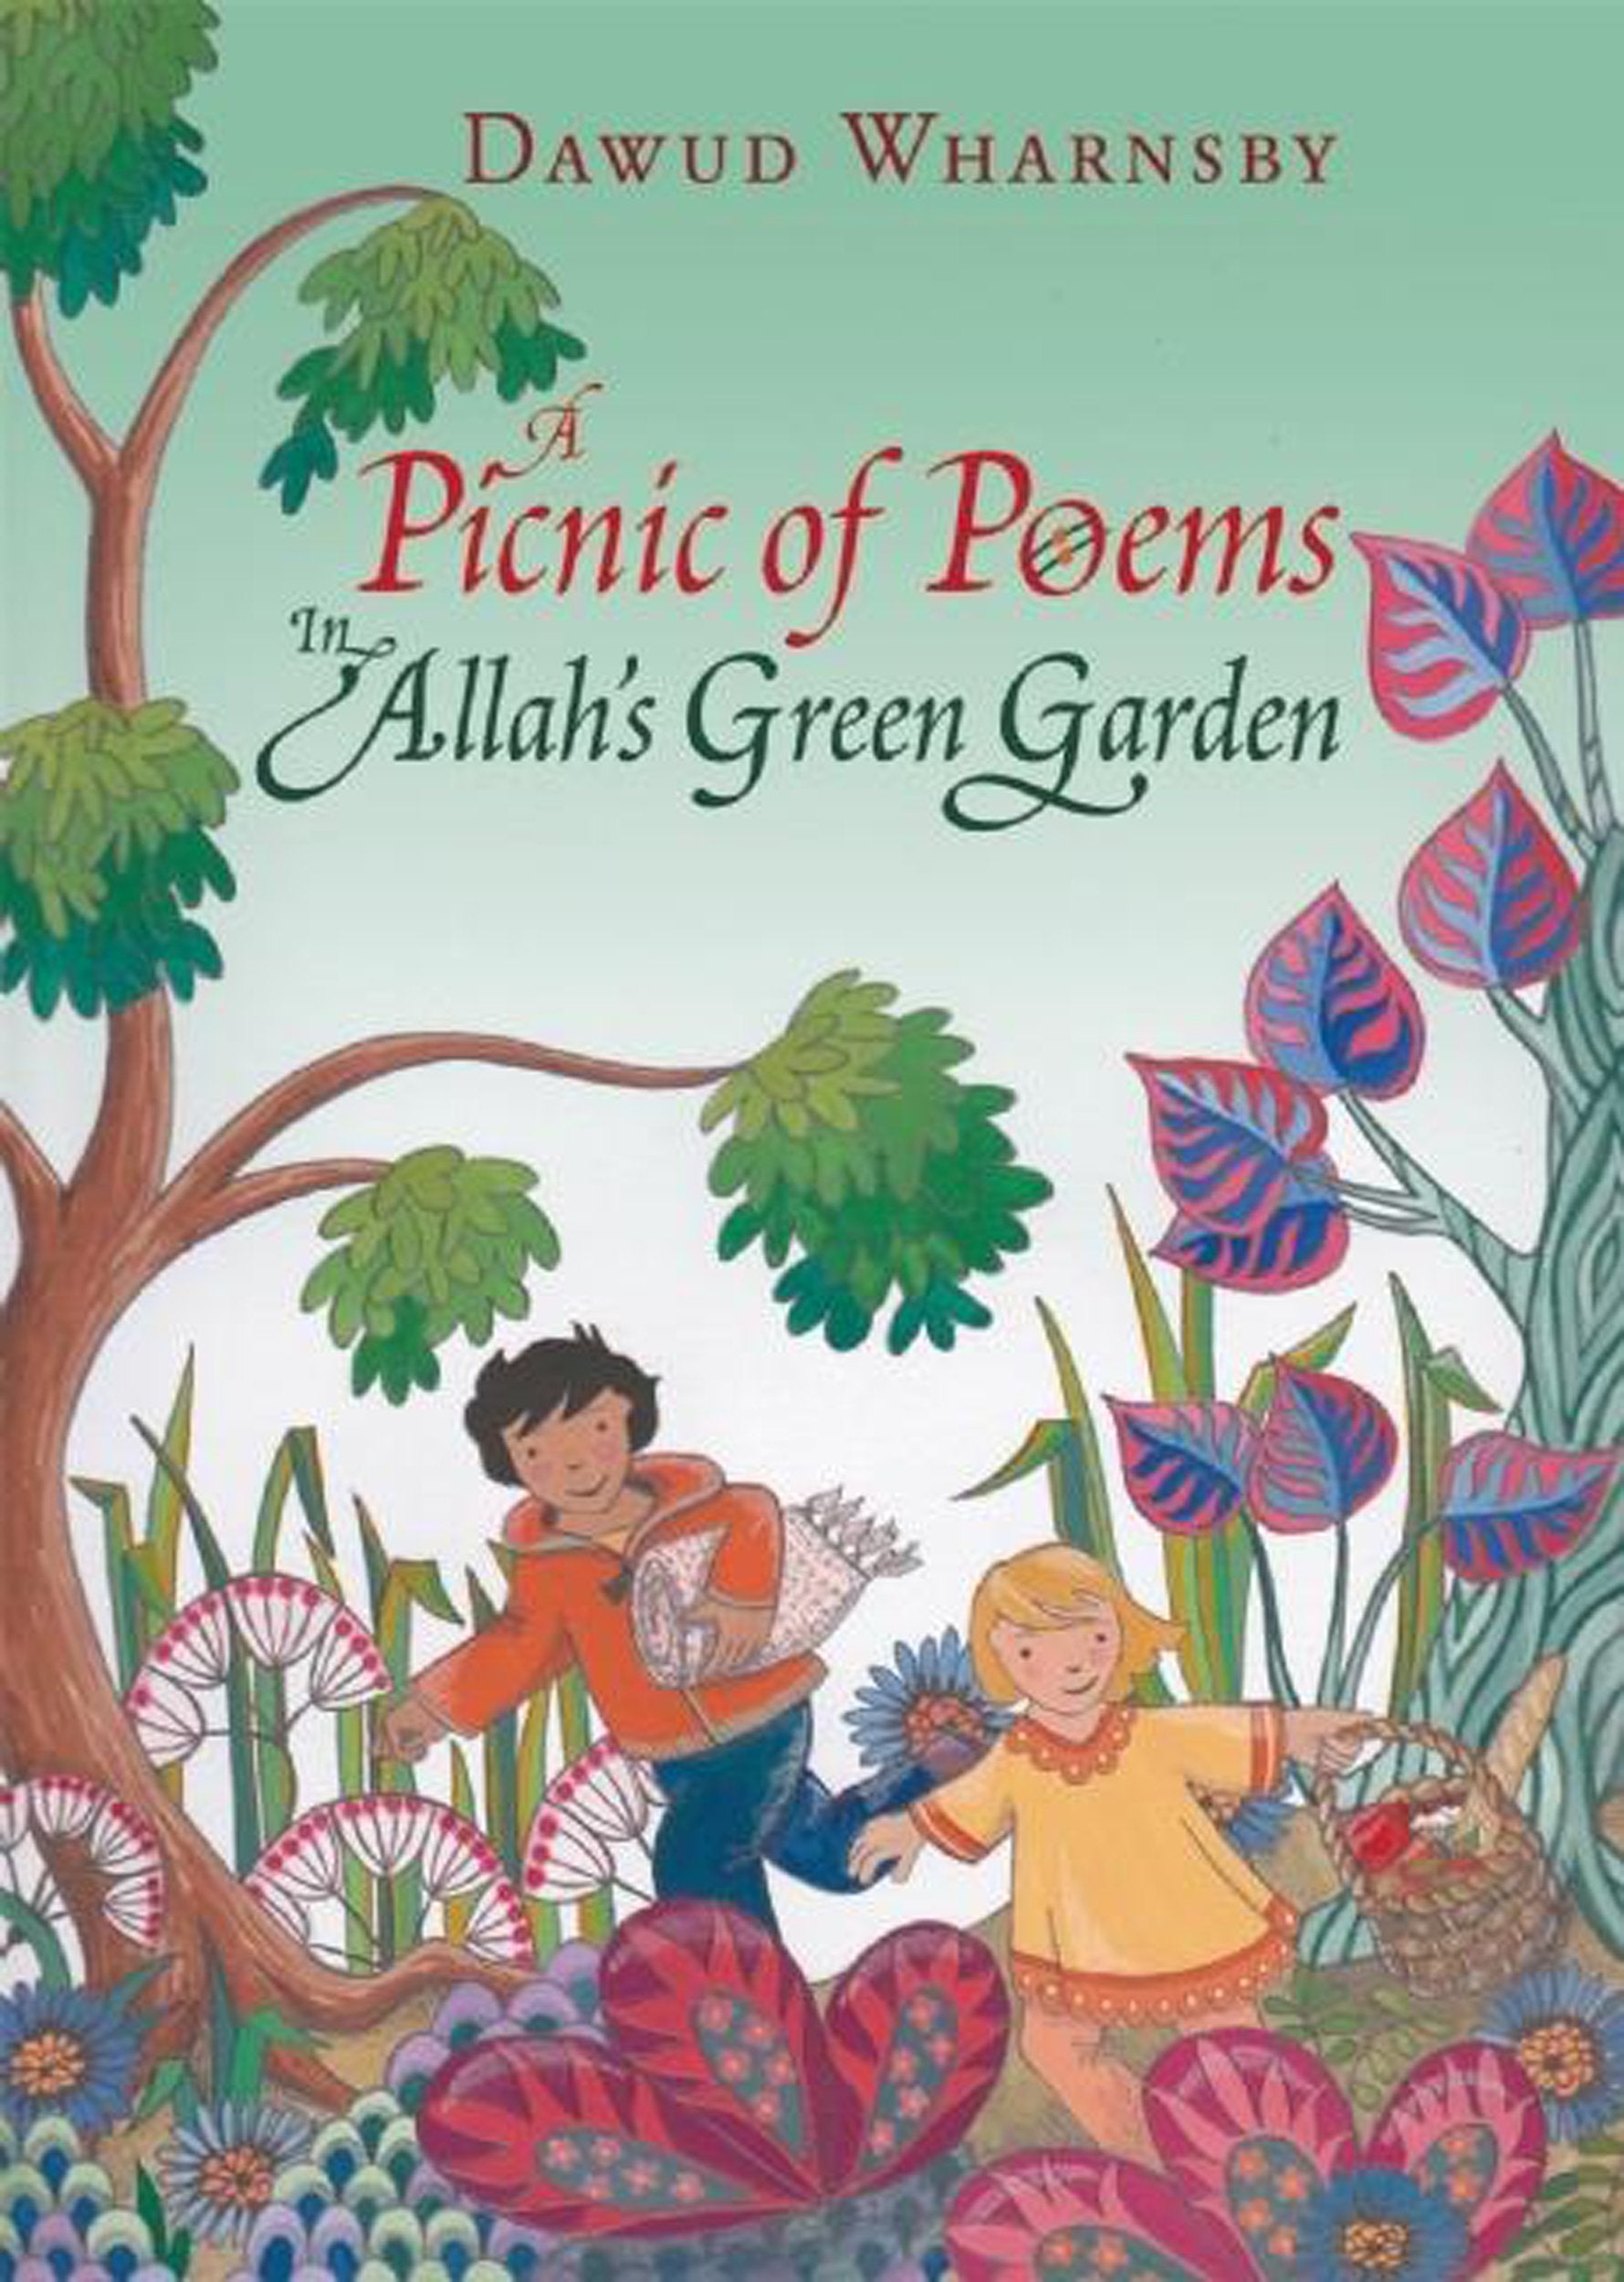 A Picnic of Poems- In Allah's Green Garden- Dawud Wharnsby